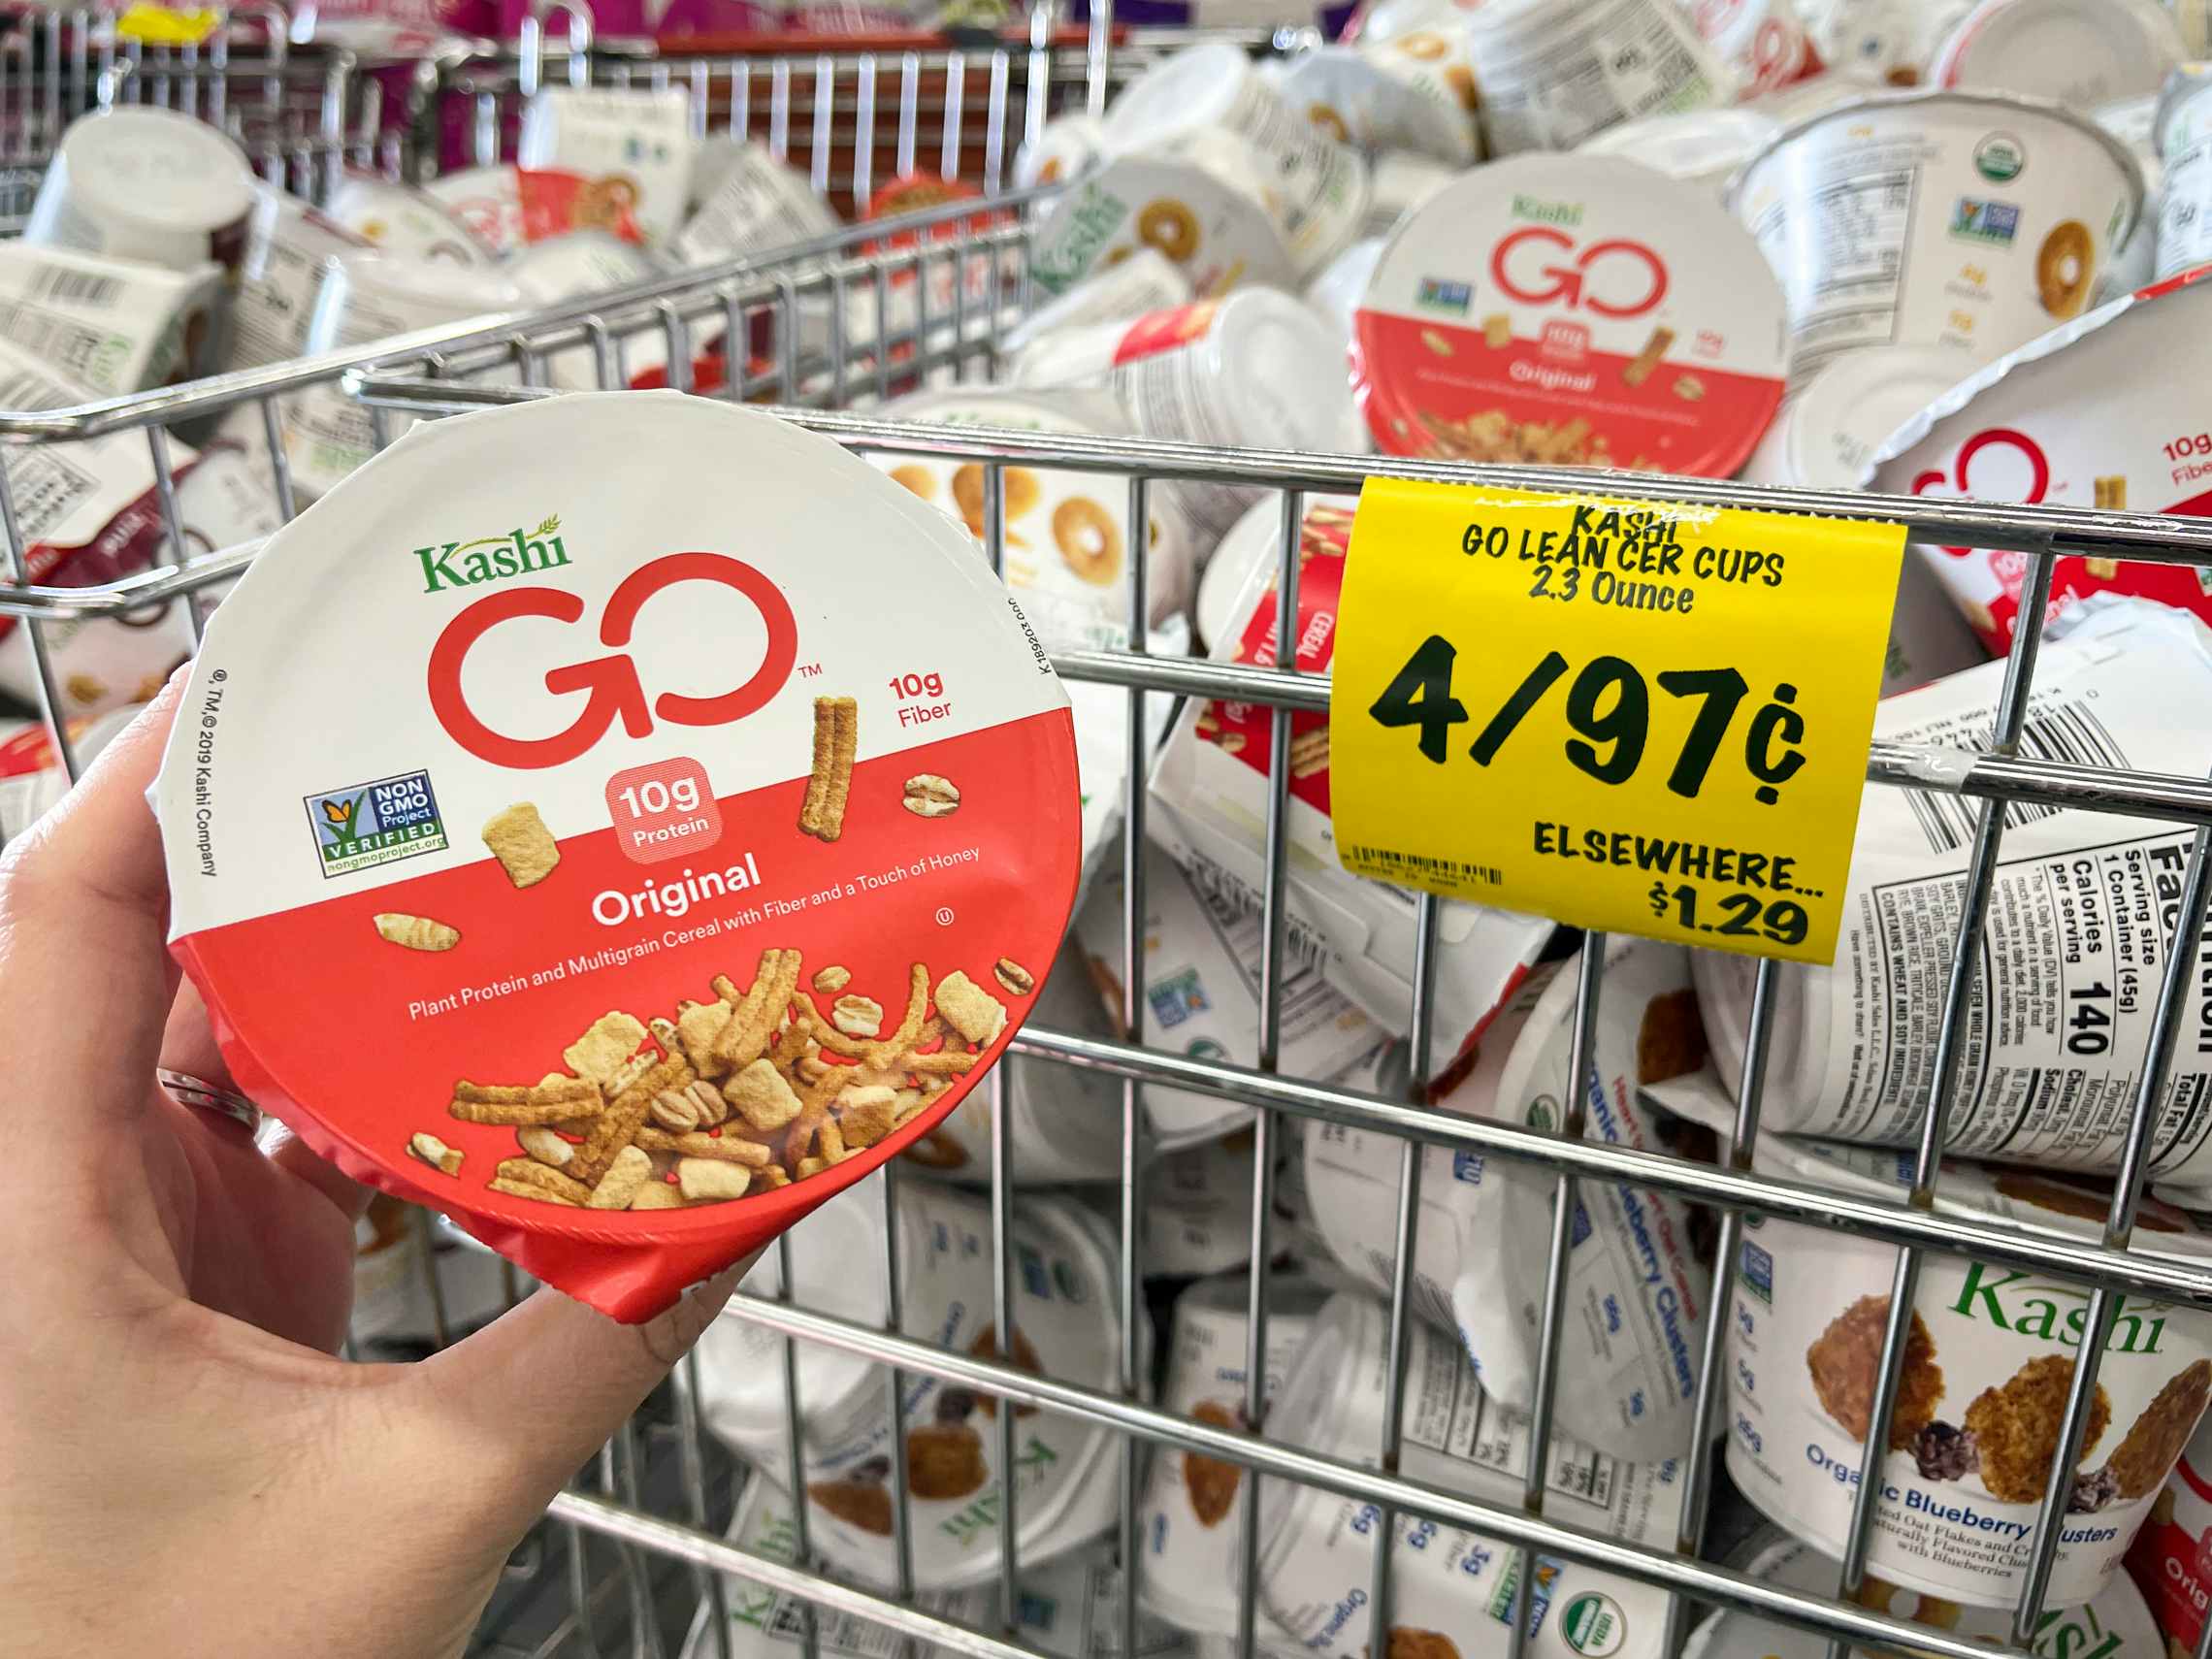 Koshi GO Lean cereal cups at Grocery Outlet.